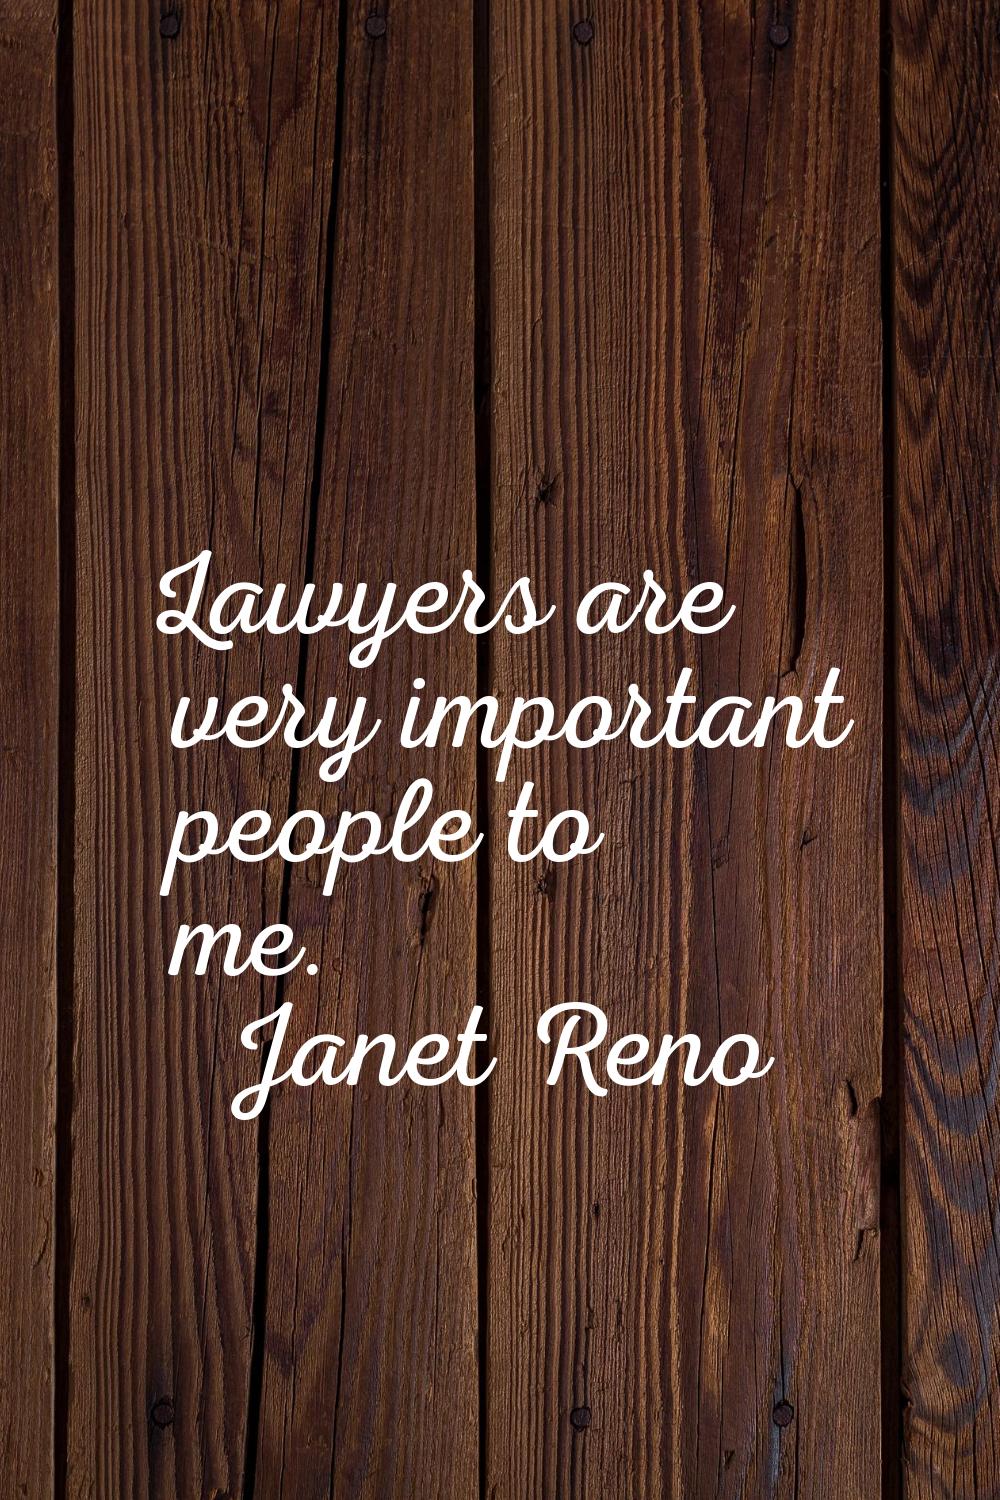 Lawyers are very important people to me.